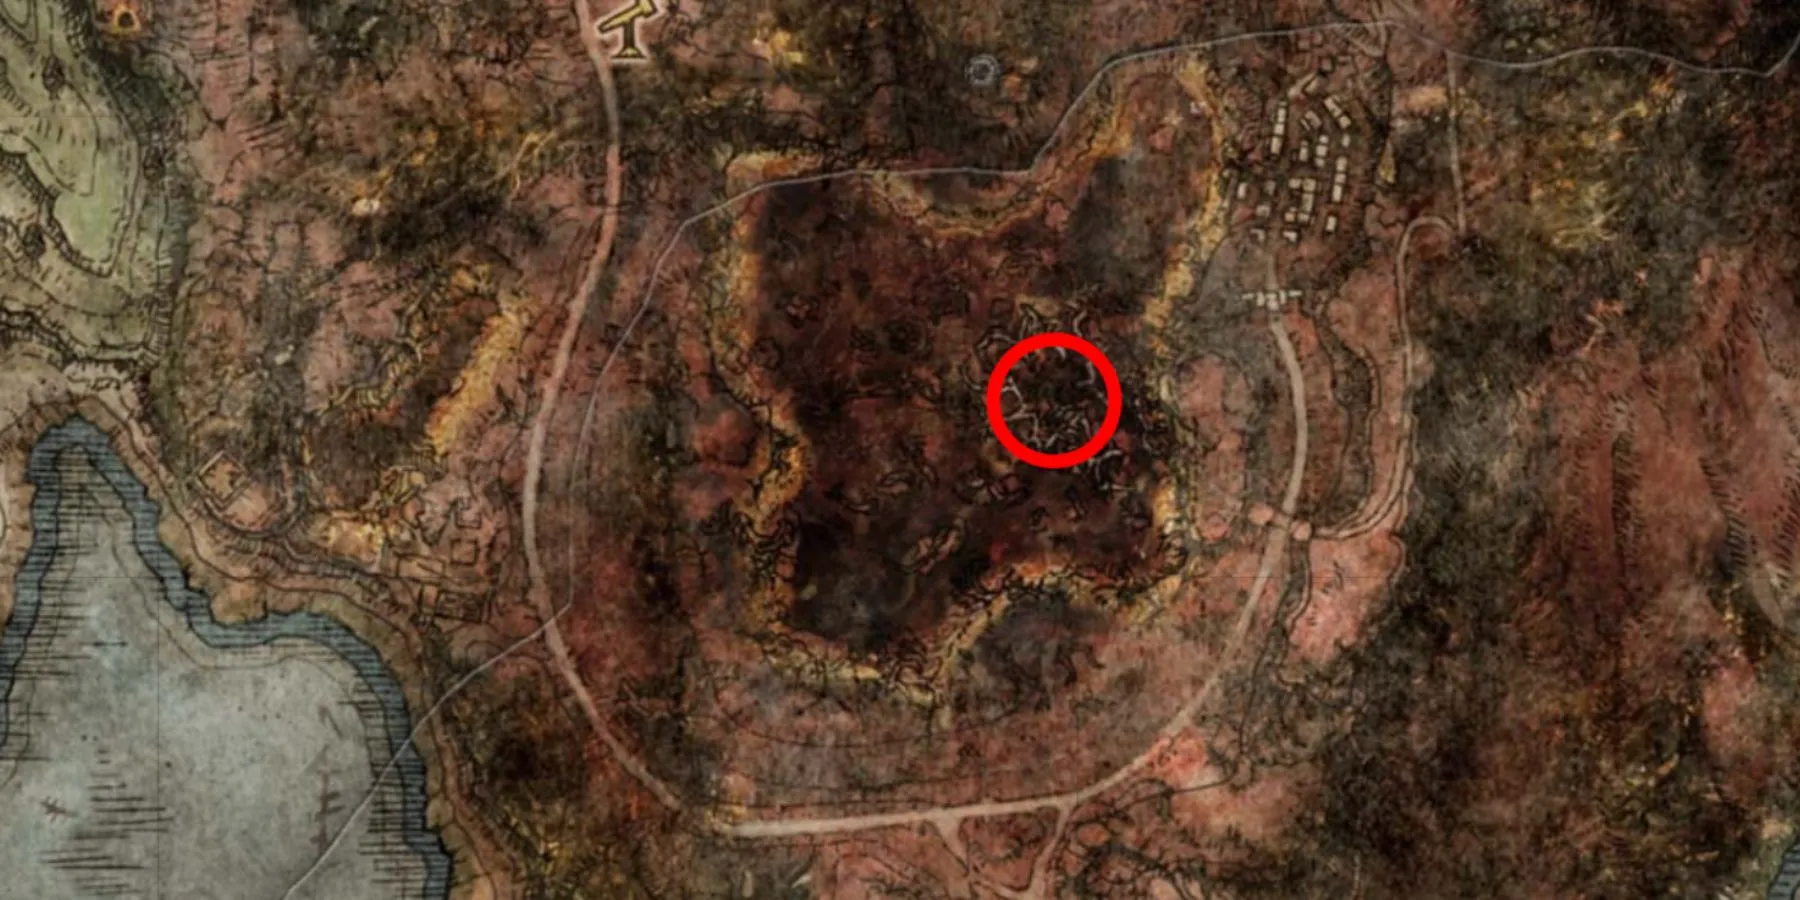 Commander O’Neil location on the map in Elden Ring